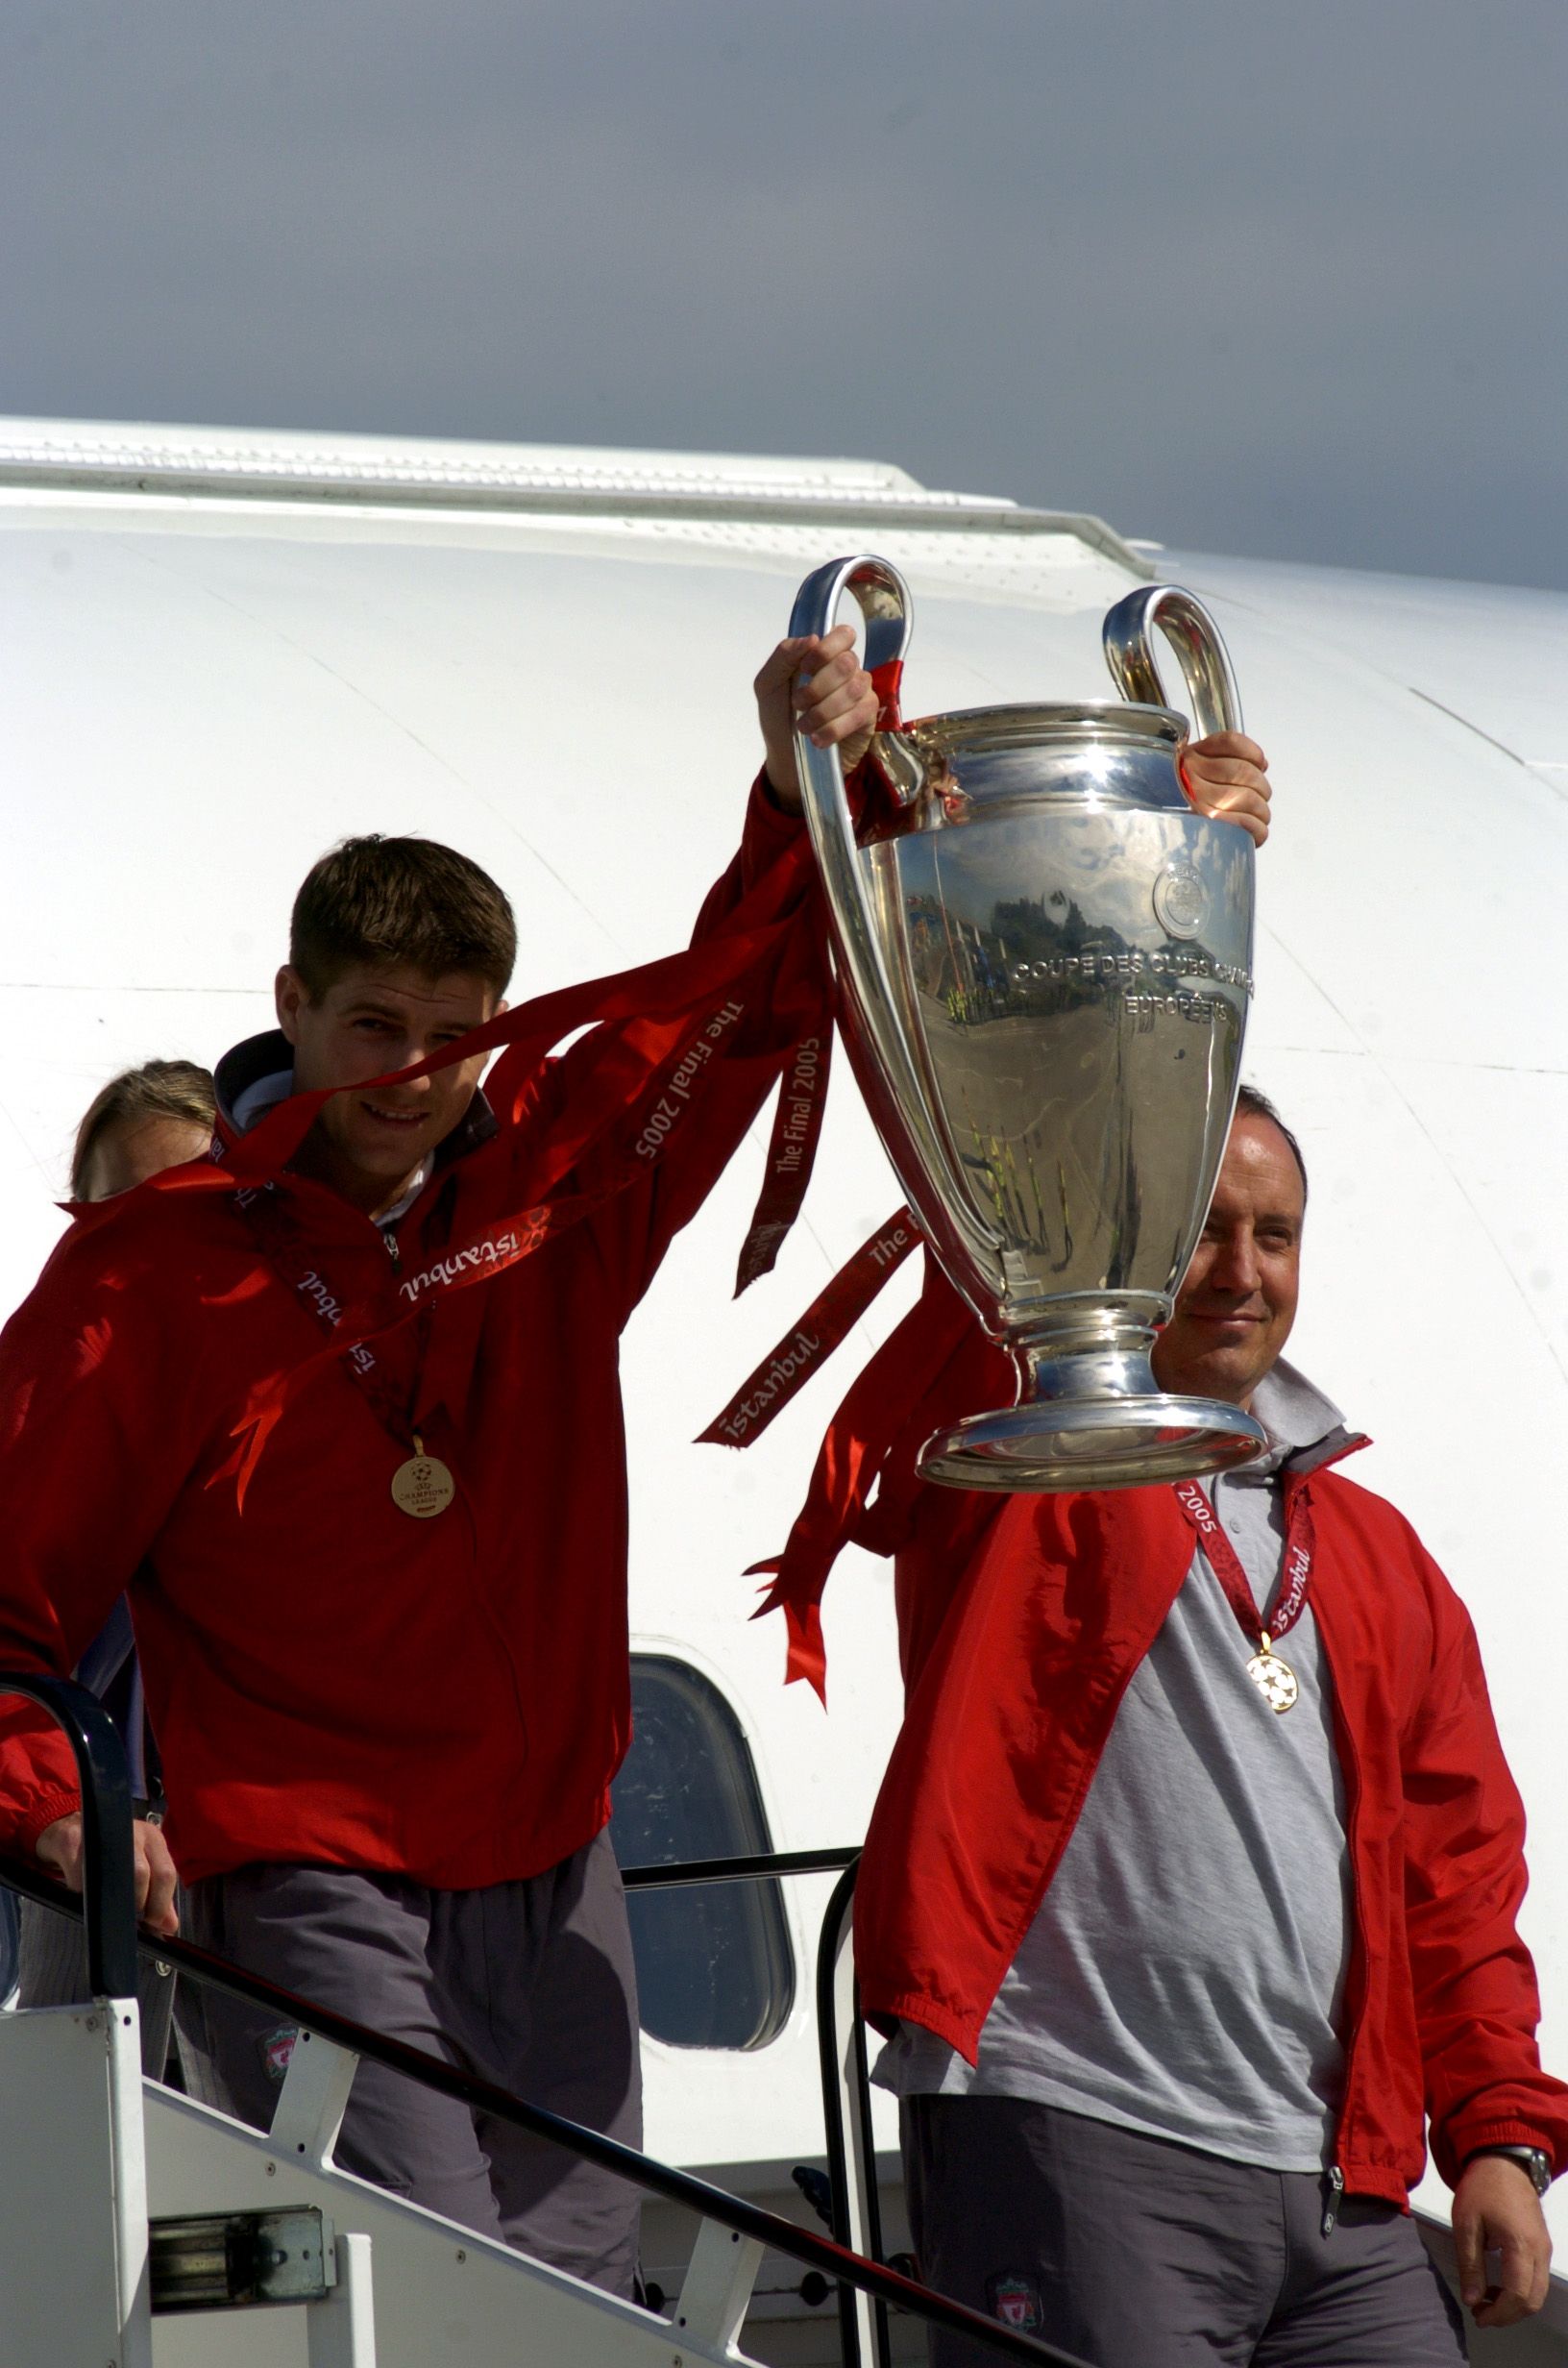 Steven Gerrard with the Champions League trophy